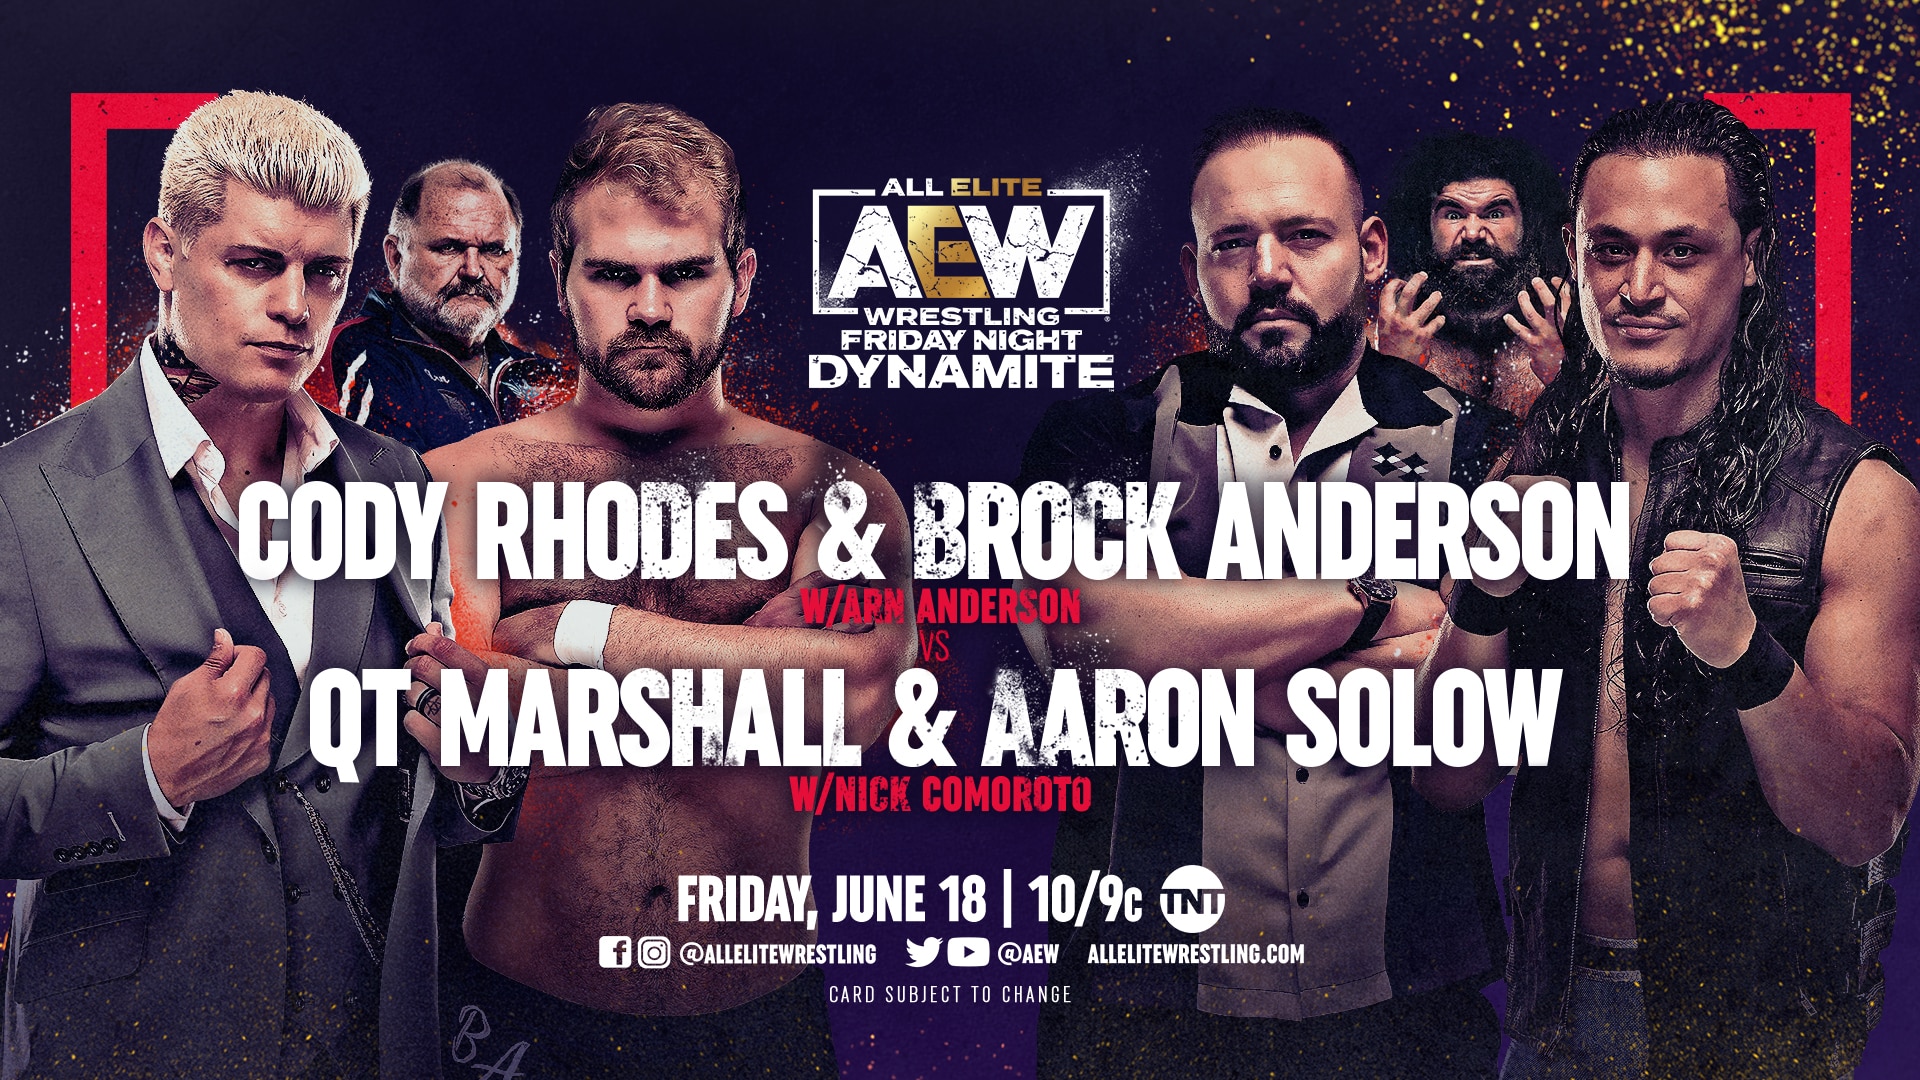 Cody Rhodes and Brock Anderson vs QT Marshall and Aaron Solow